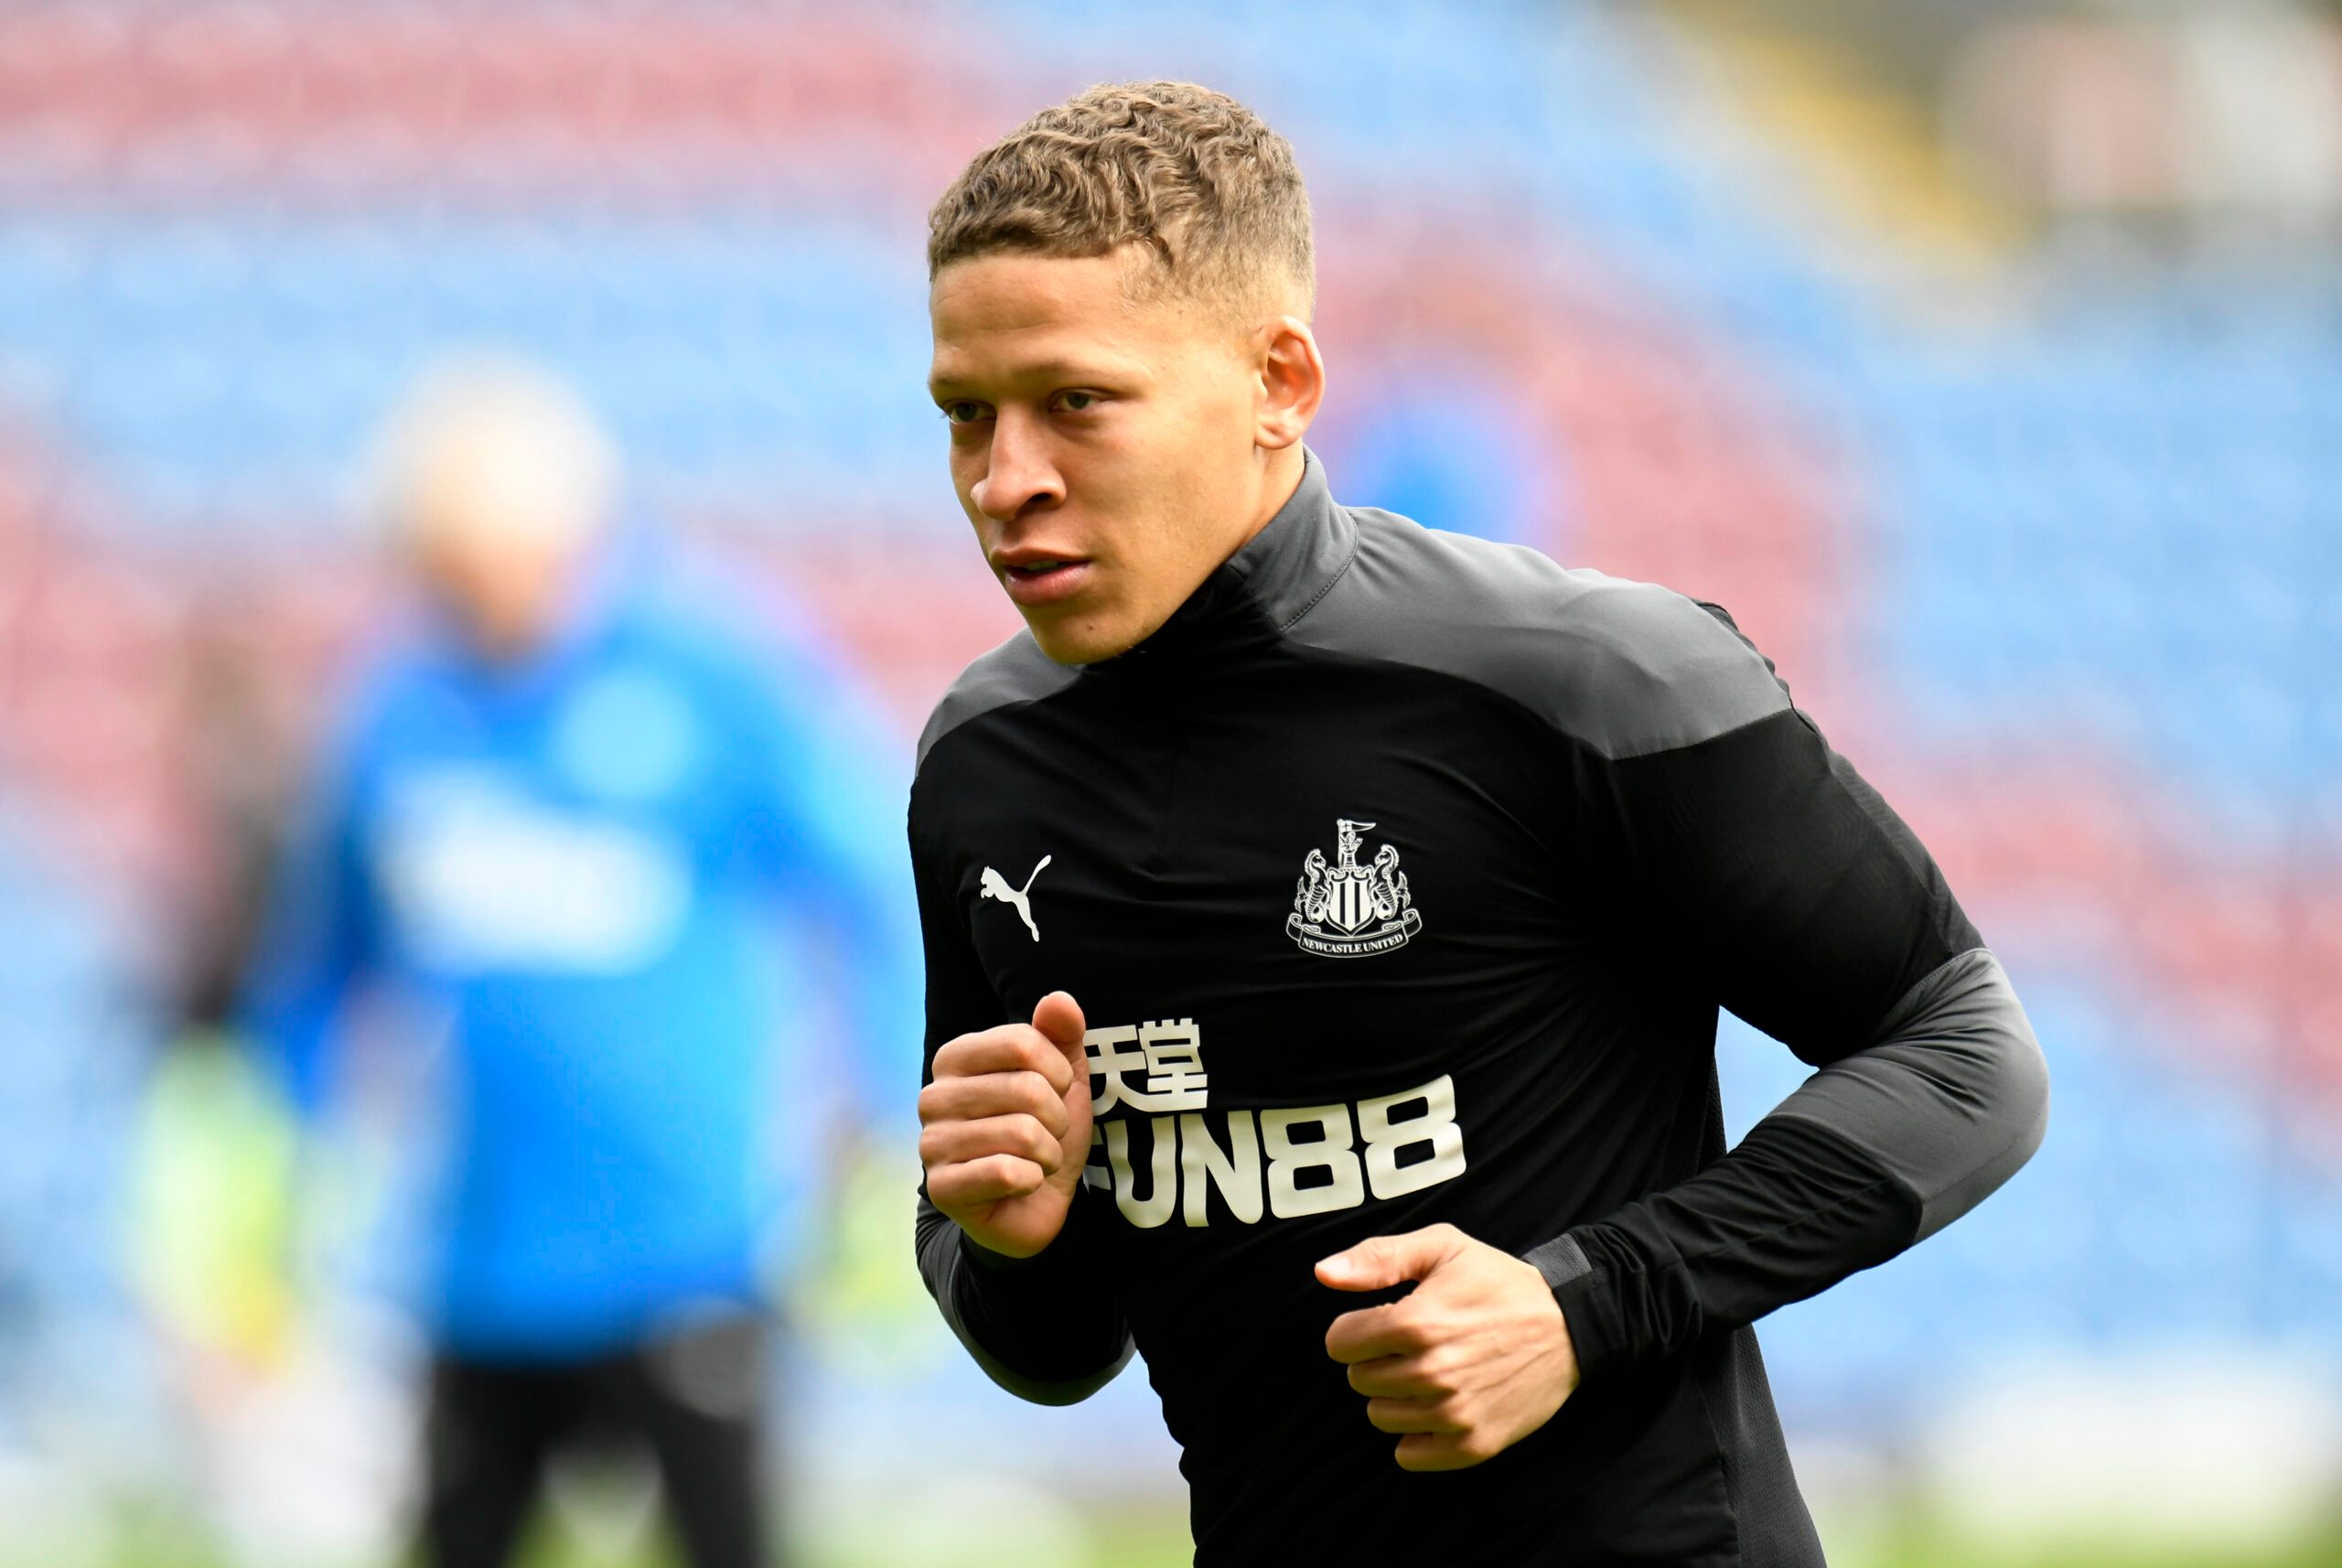 Soccer Football - Premier League - Burnley v Newcastle United - Turf Moor, Burnley, Britain - April 11, 2021 Newcastle United's Dwight Gayle during the warm up before the match Pool via REUTERS/Peter Powell EDITORIAL USE ONLY. No use with unauthorized audio, video, data, fixture lists, club/league logos or 'live' services. Online in-match use limited to 75 images, no video emulation. No use in betting, games or single club /league/player publications.  Please contact your account representative 